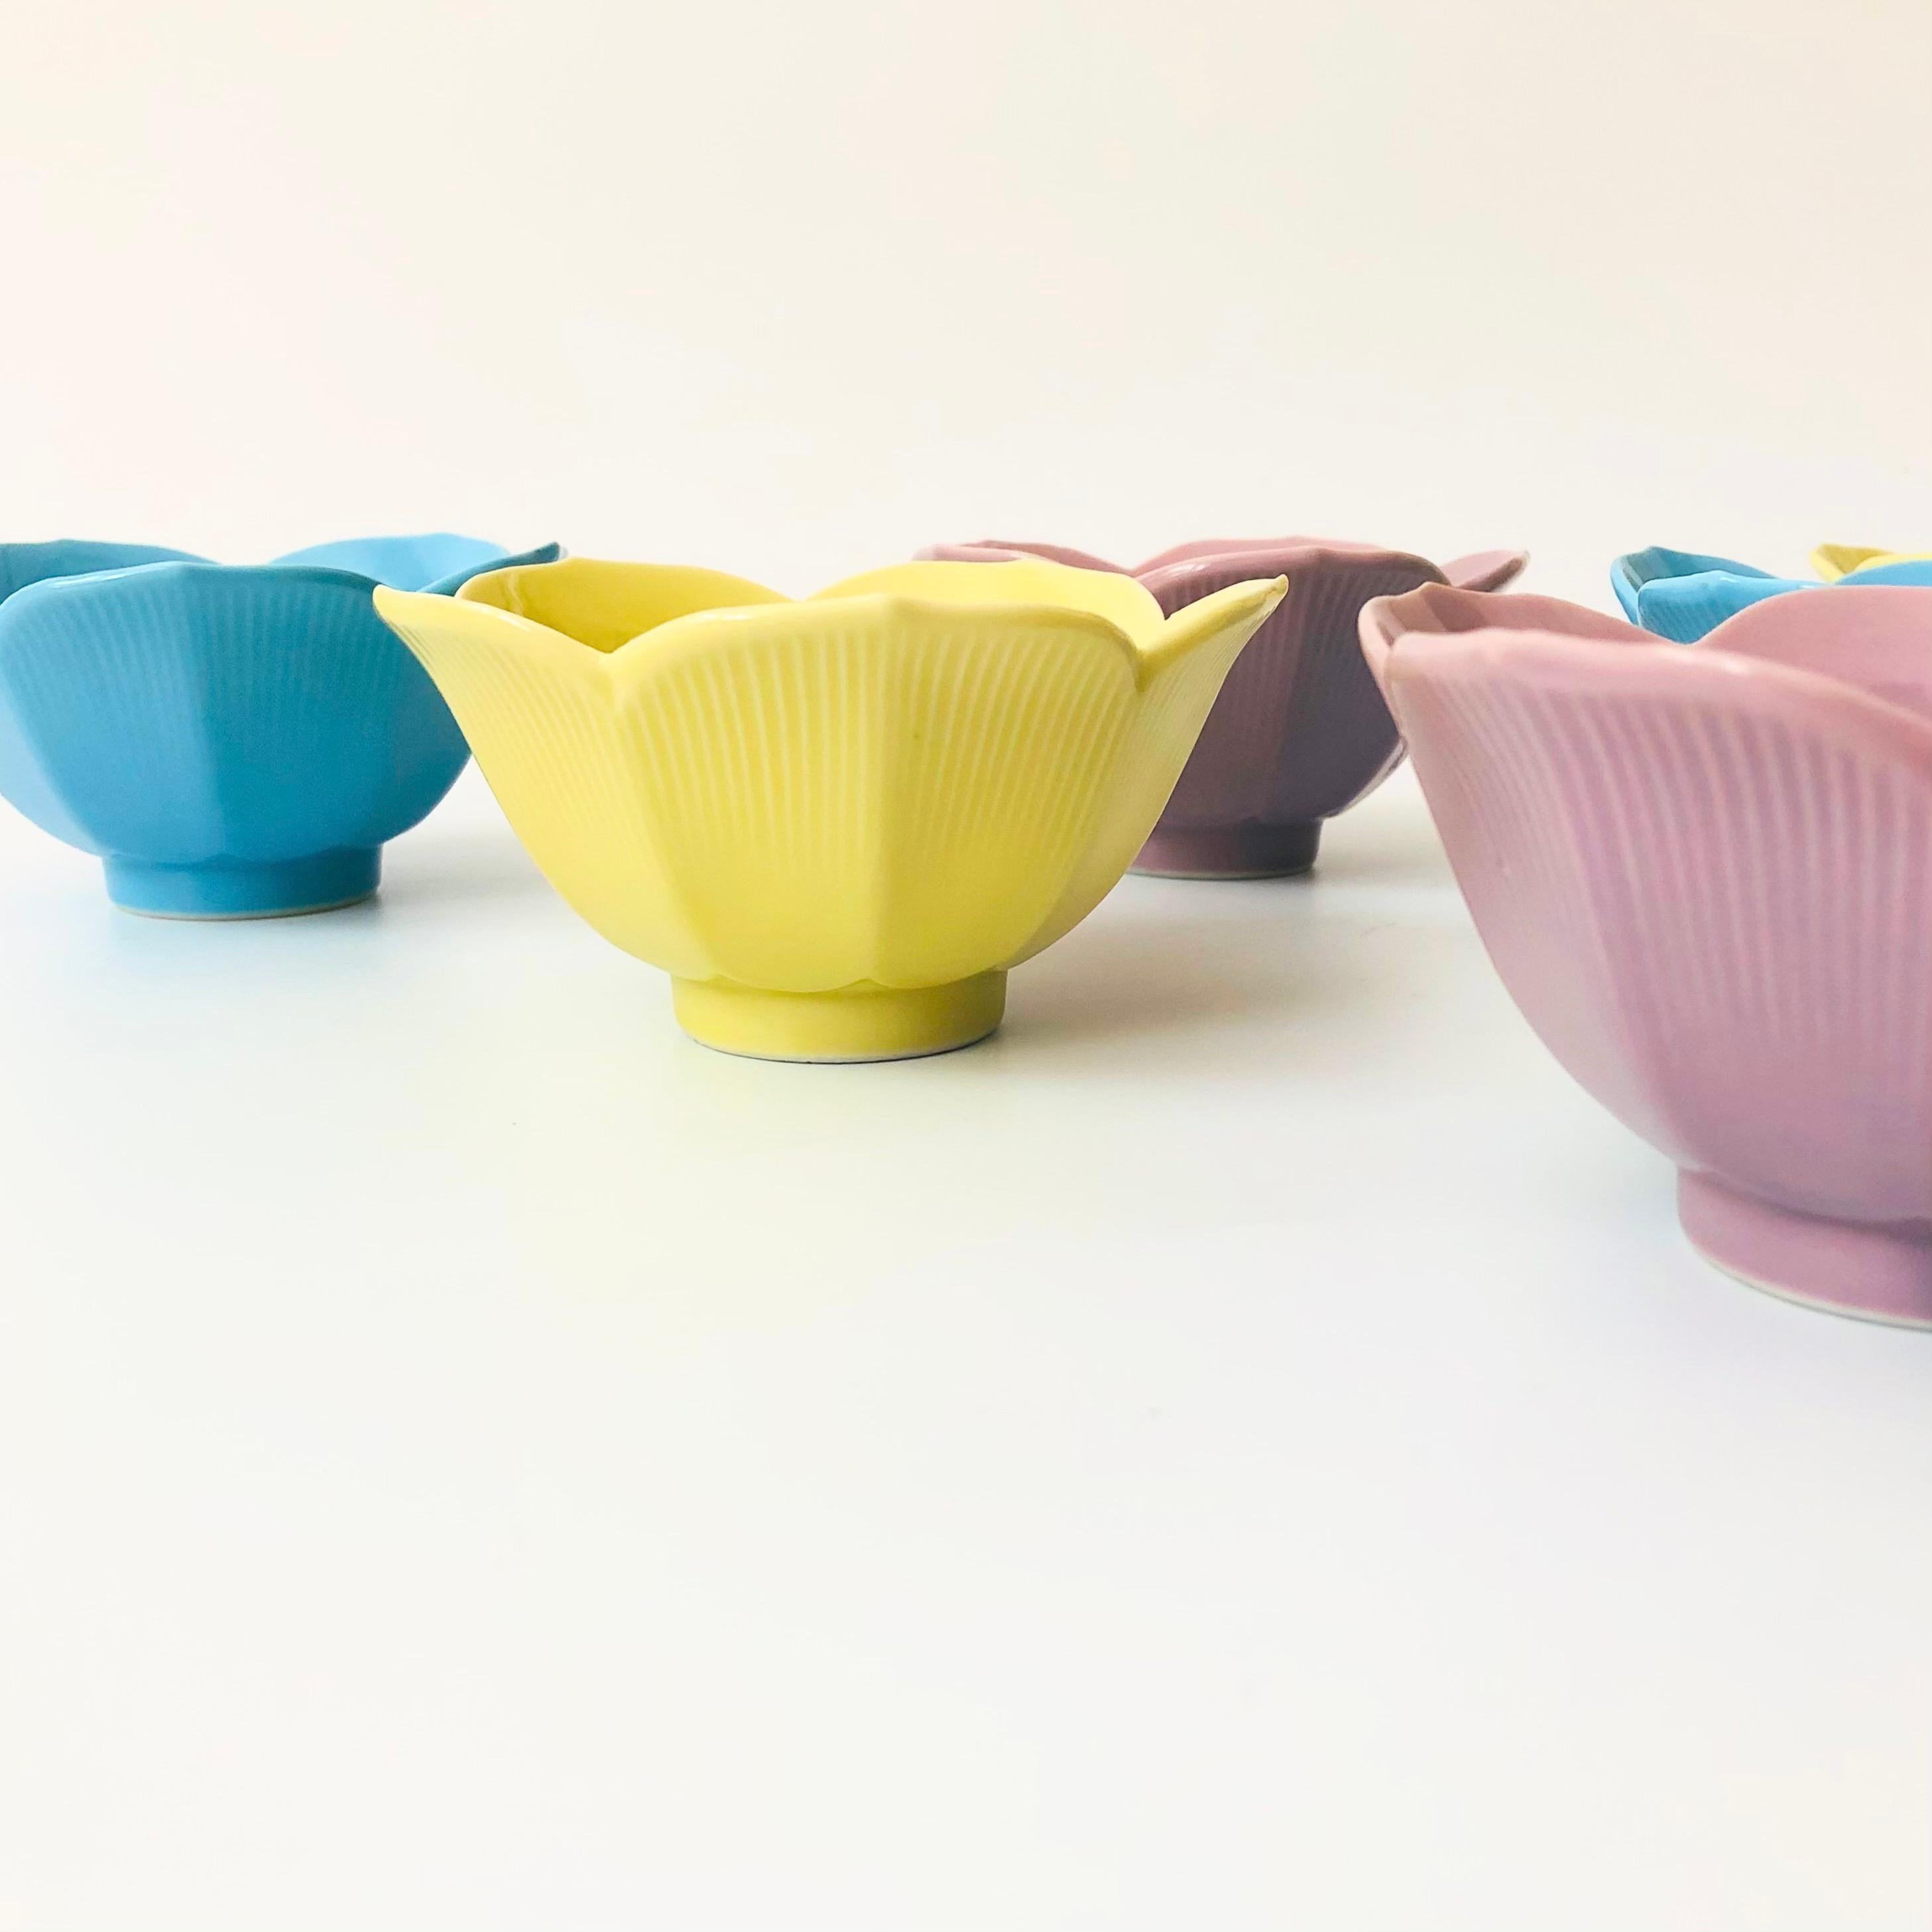 Colorful Lotus Bowls - Set of 6 For Sale 1